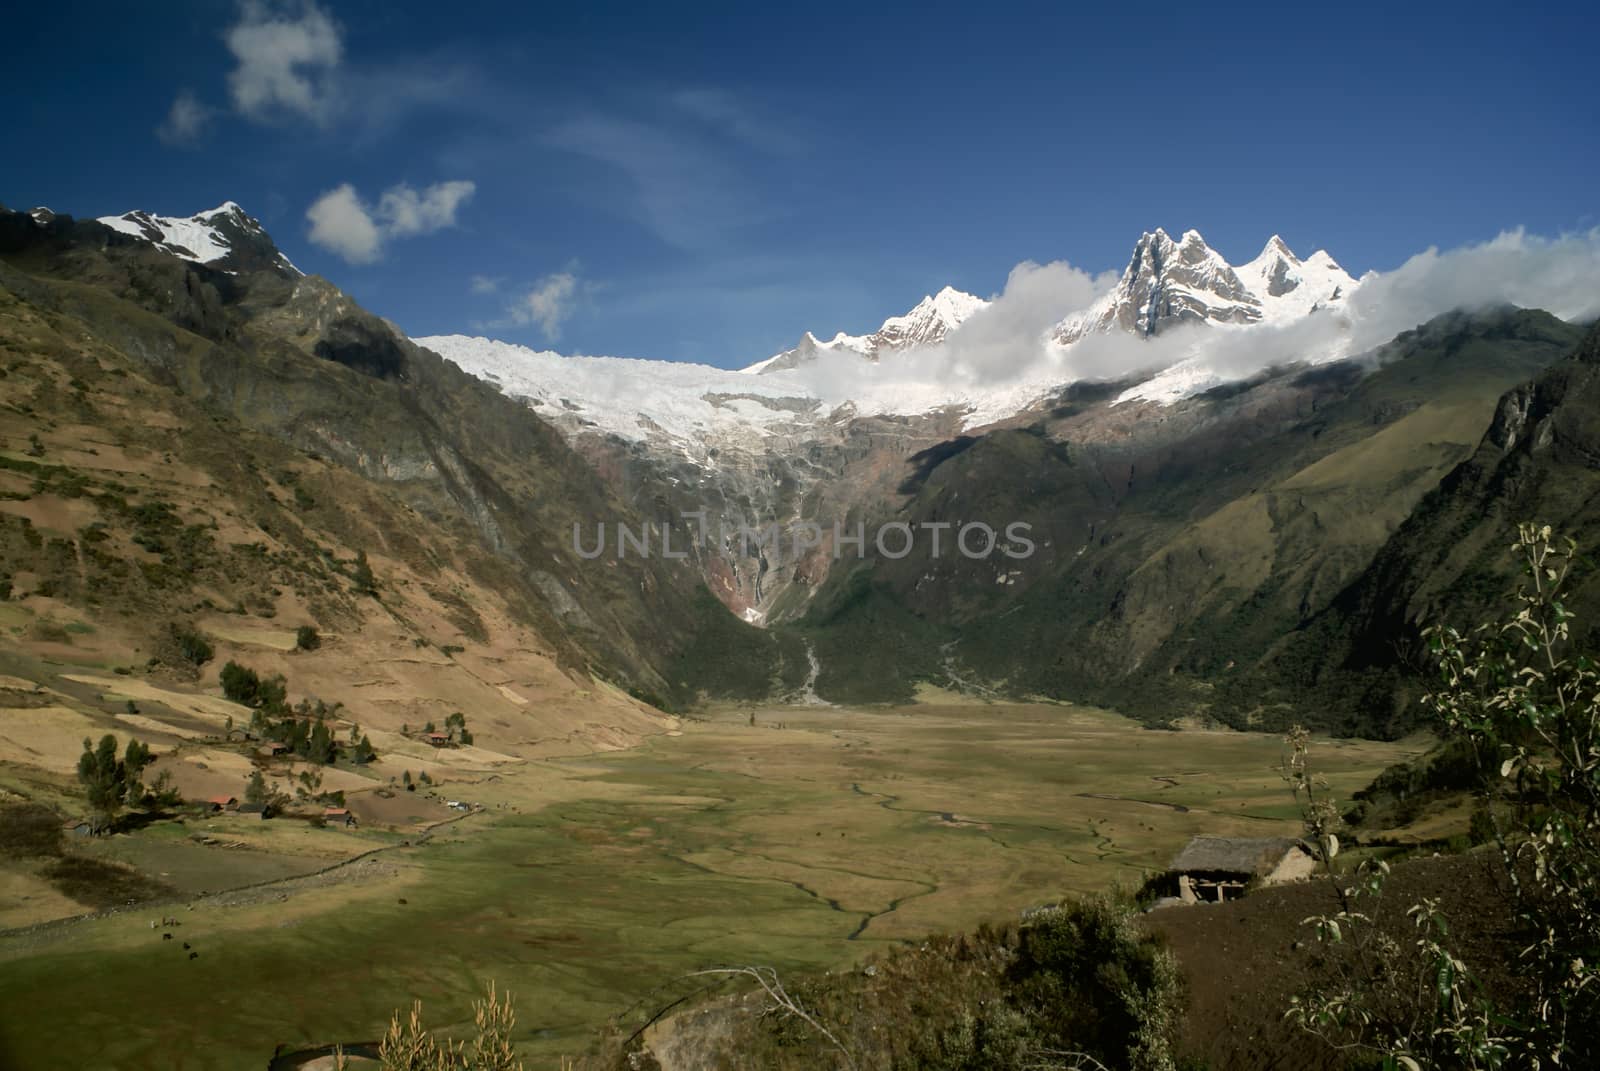 Scenic green valley in between high peaks of mountains in Peruvian Andes